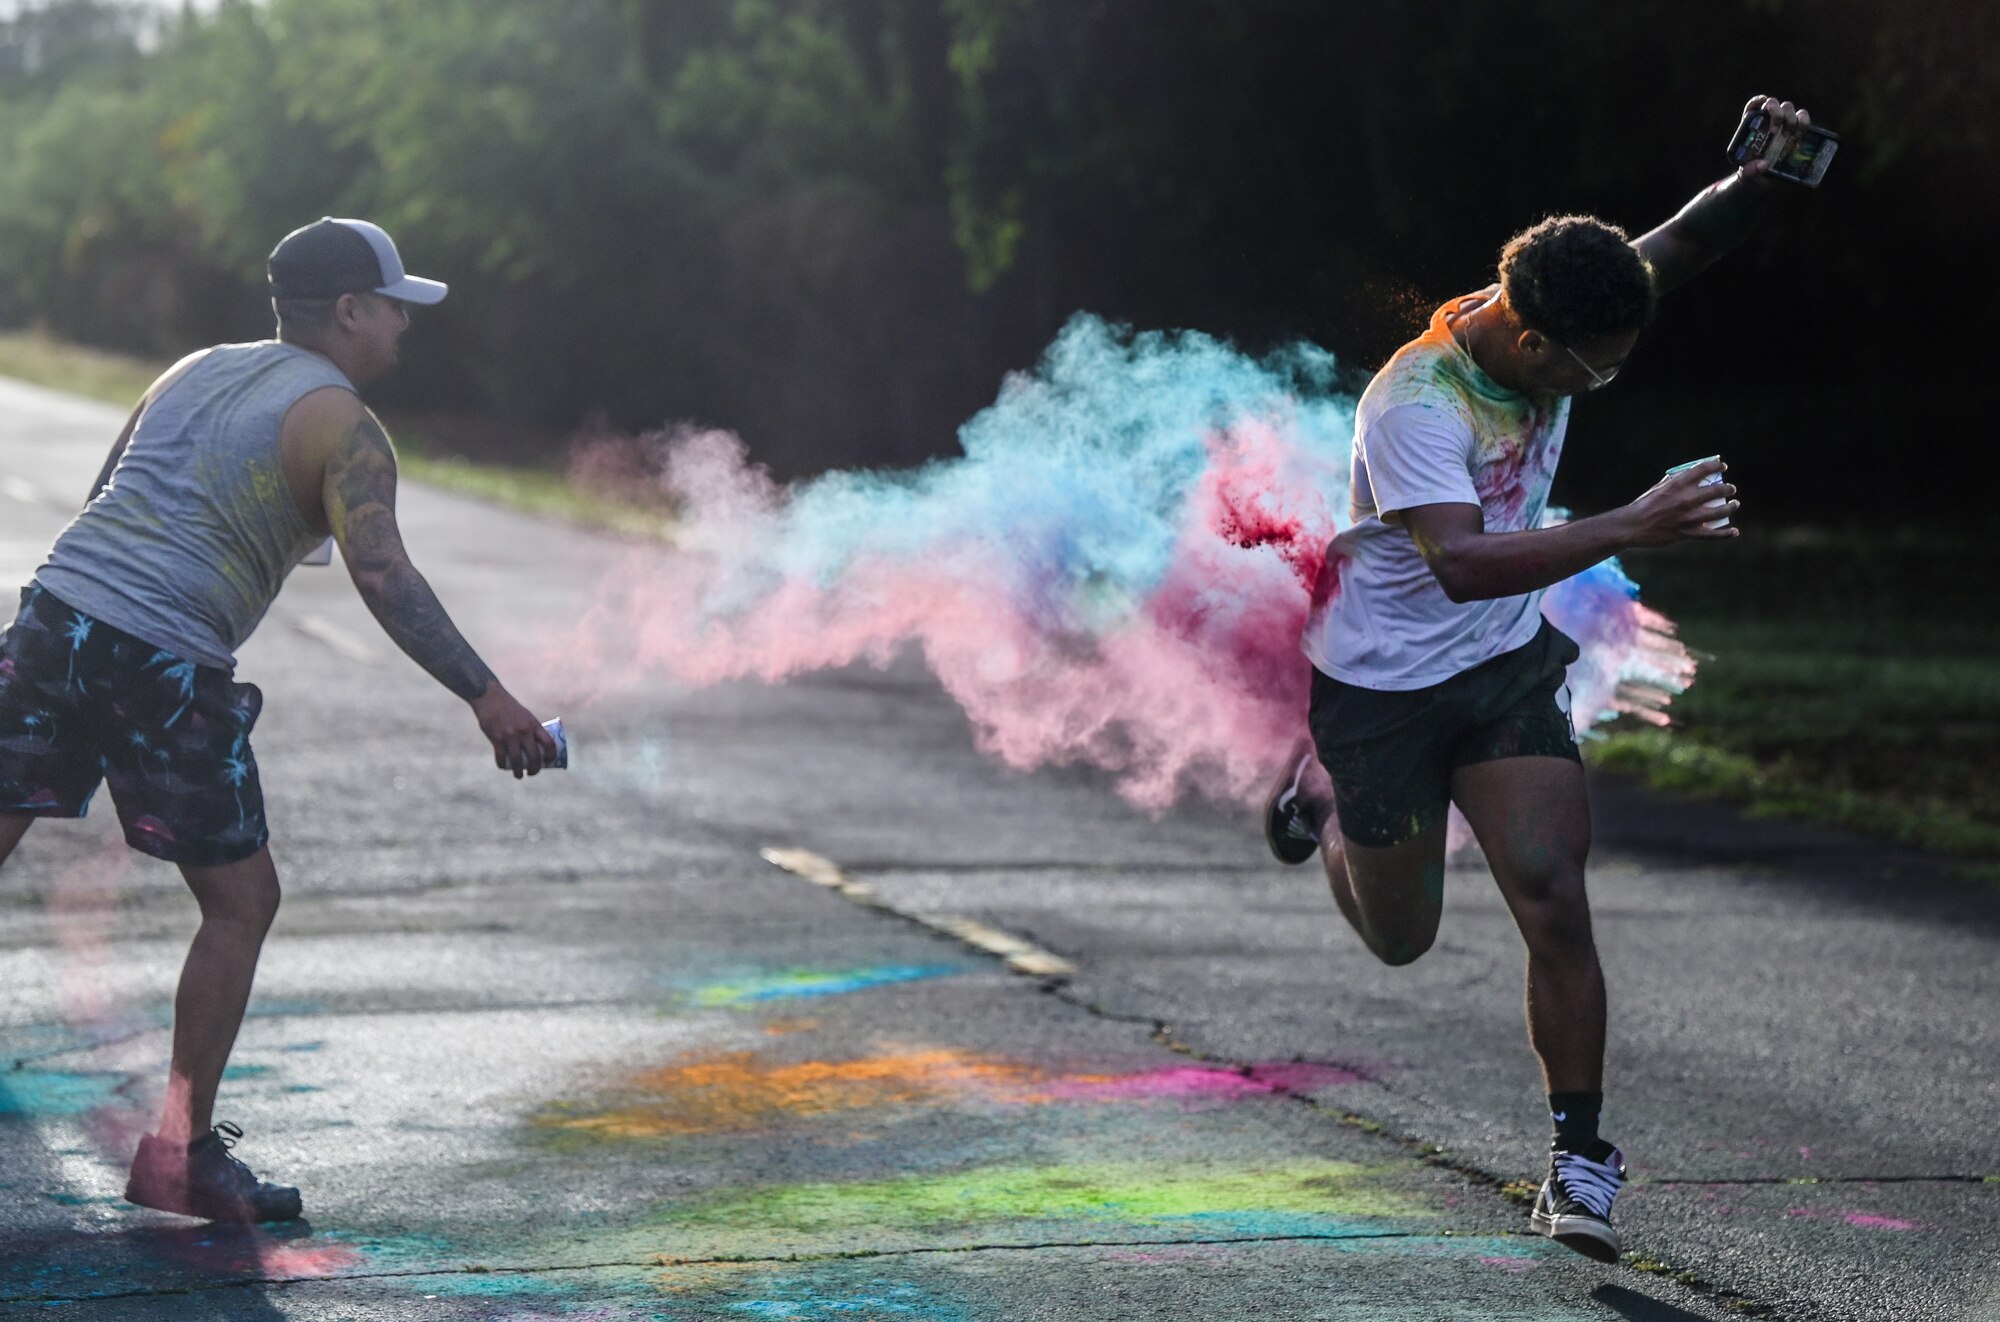 Airman 1st Class Juan Garcia, 647th Security Forces Squadron patrolman, tosses colored chalk at Airman Shawn Patton, 647th SFS installation entry controller, during a 5K Fun Run at Joint Base Pearl Harbor-Hickam, Hawaii, Sept. 23, 2022. The 15th Wing Violence Prevention Office worked with the 647th Security Forces Squadron to invite Hickam Airmen to run in support of Suicide Prevention Month. (U.S. Air Force photo by Staff Sgt. Alan Ricker)